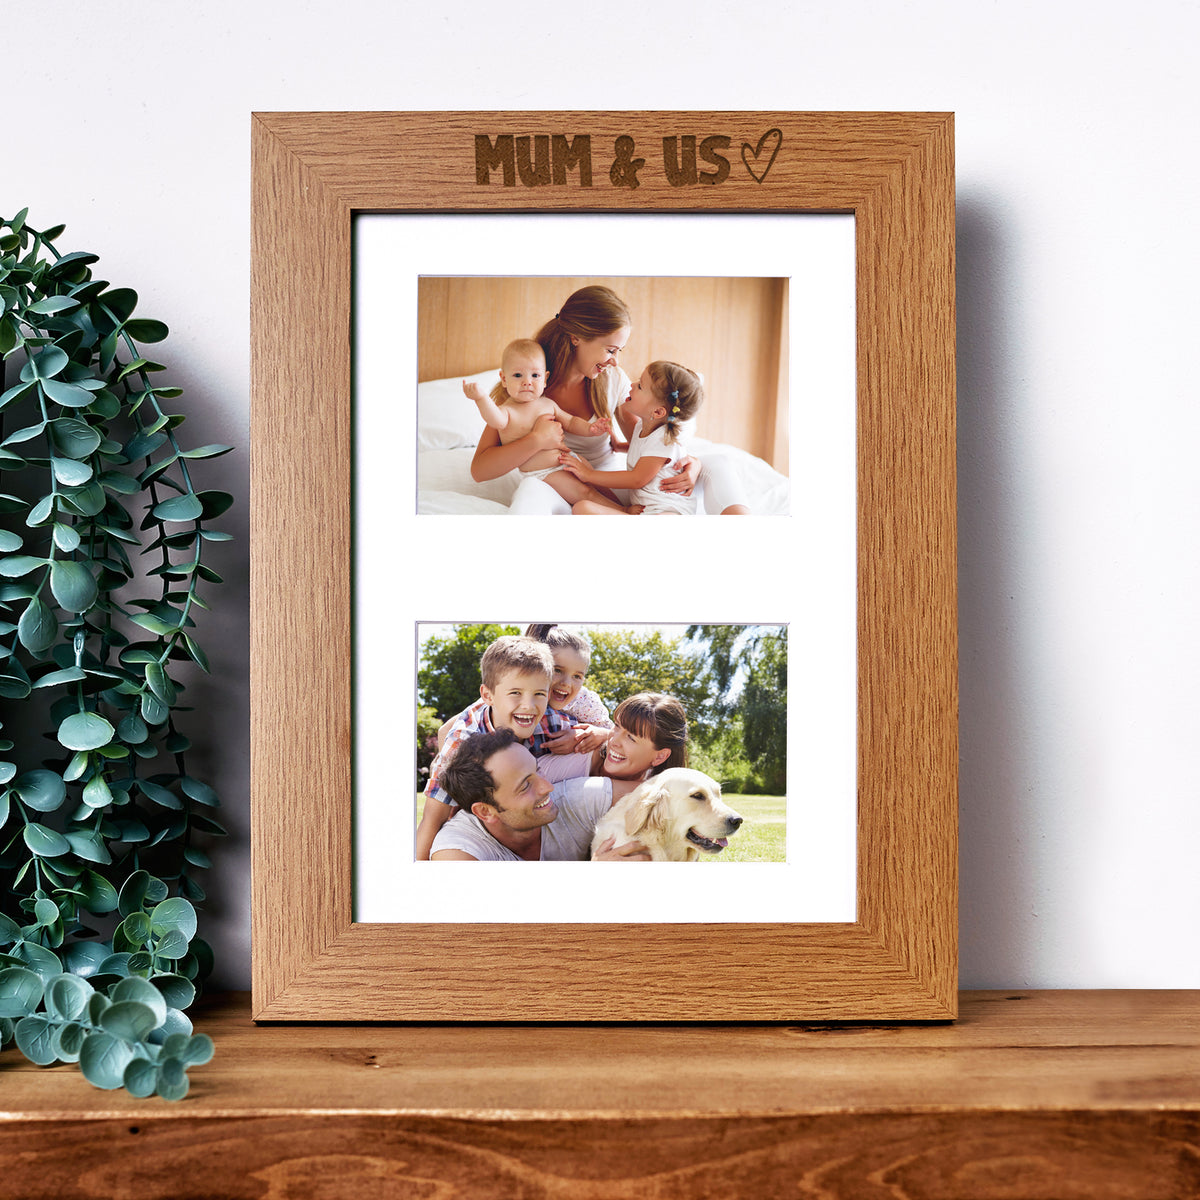 Mum and Us Photo Picture Frame Double 6x4 Inch Landscape